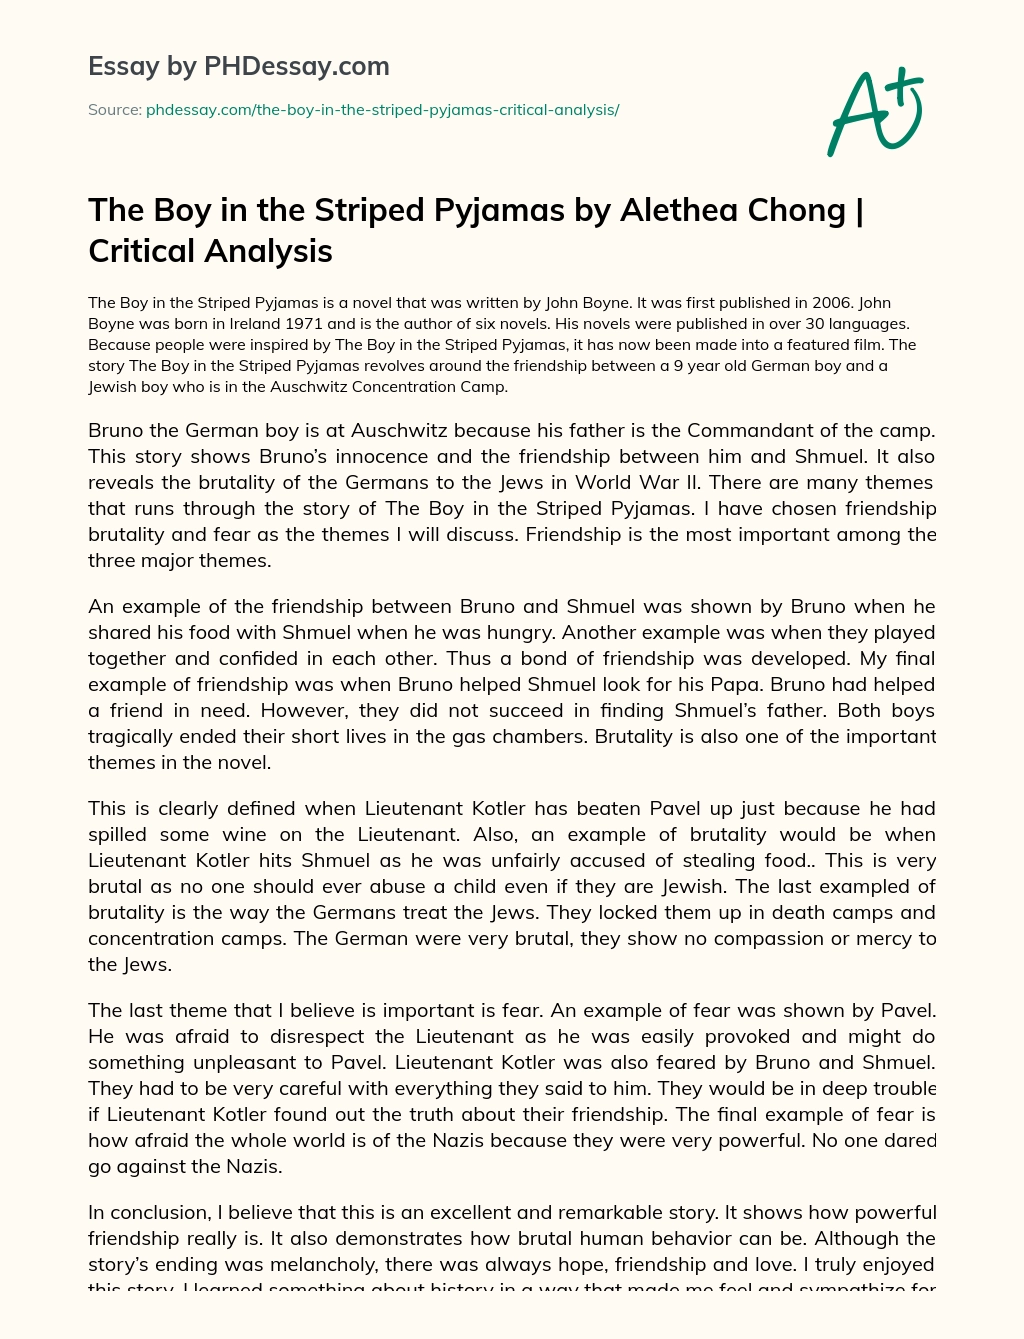 5 paragraph essay on the boy in the striped pajamas